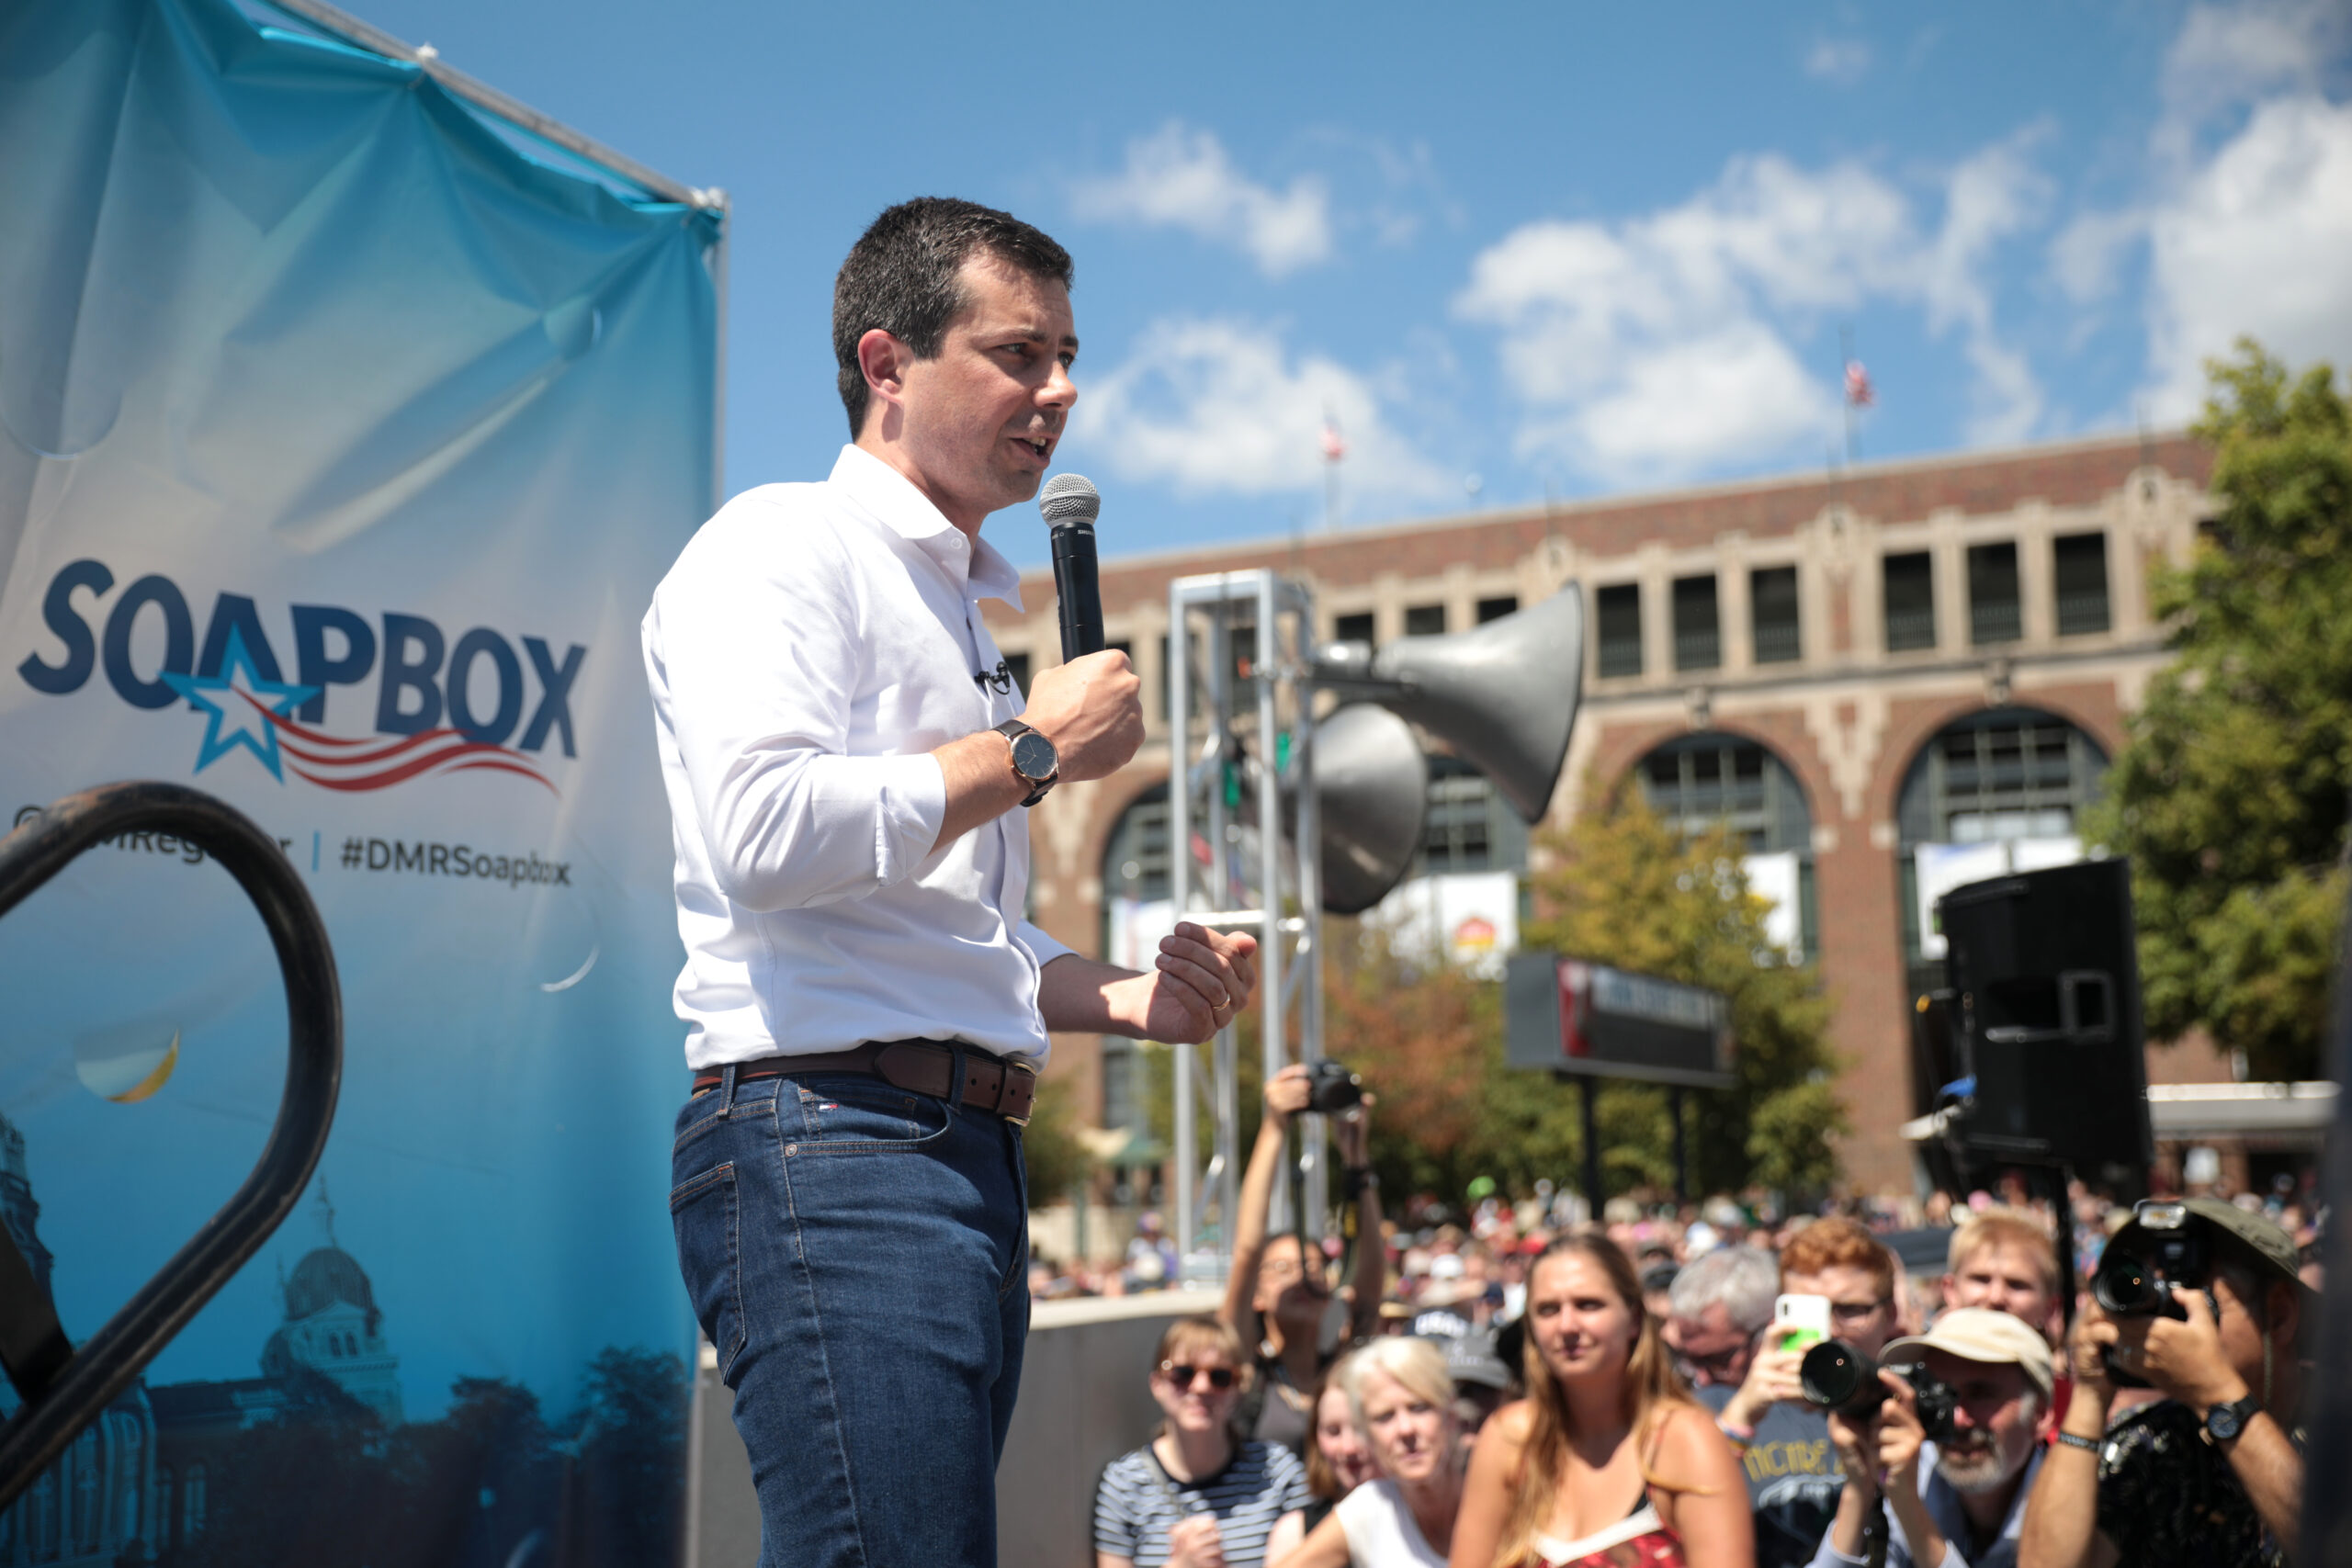 Mayor Pete Buttigieg at a campaign event in Des Moines, Iowa. He is expected to perform well at the state's caucus.